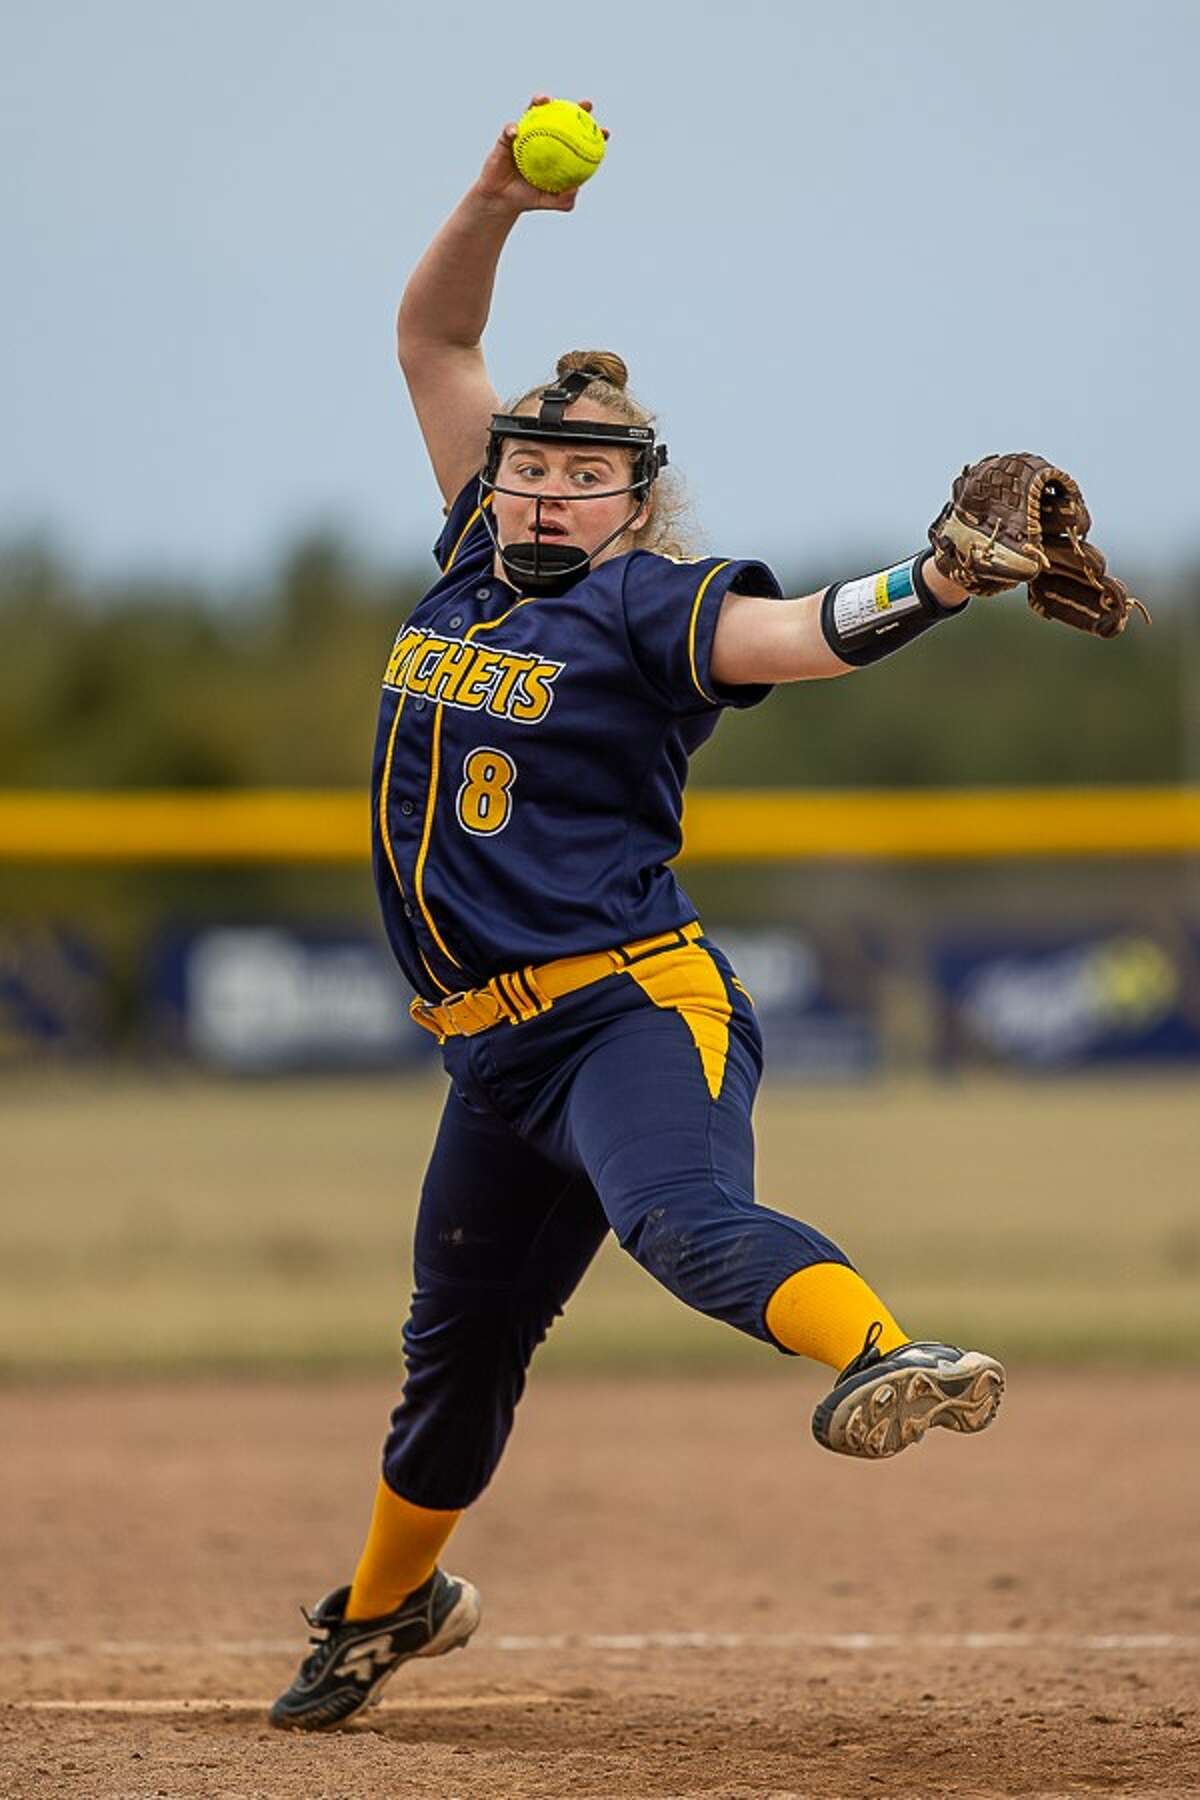 Bad Axe's Haley Newland set the strikeout record for the Lady Hatchets with her 208th strikeout.